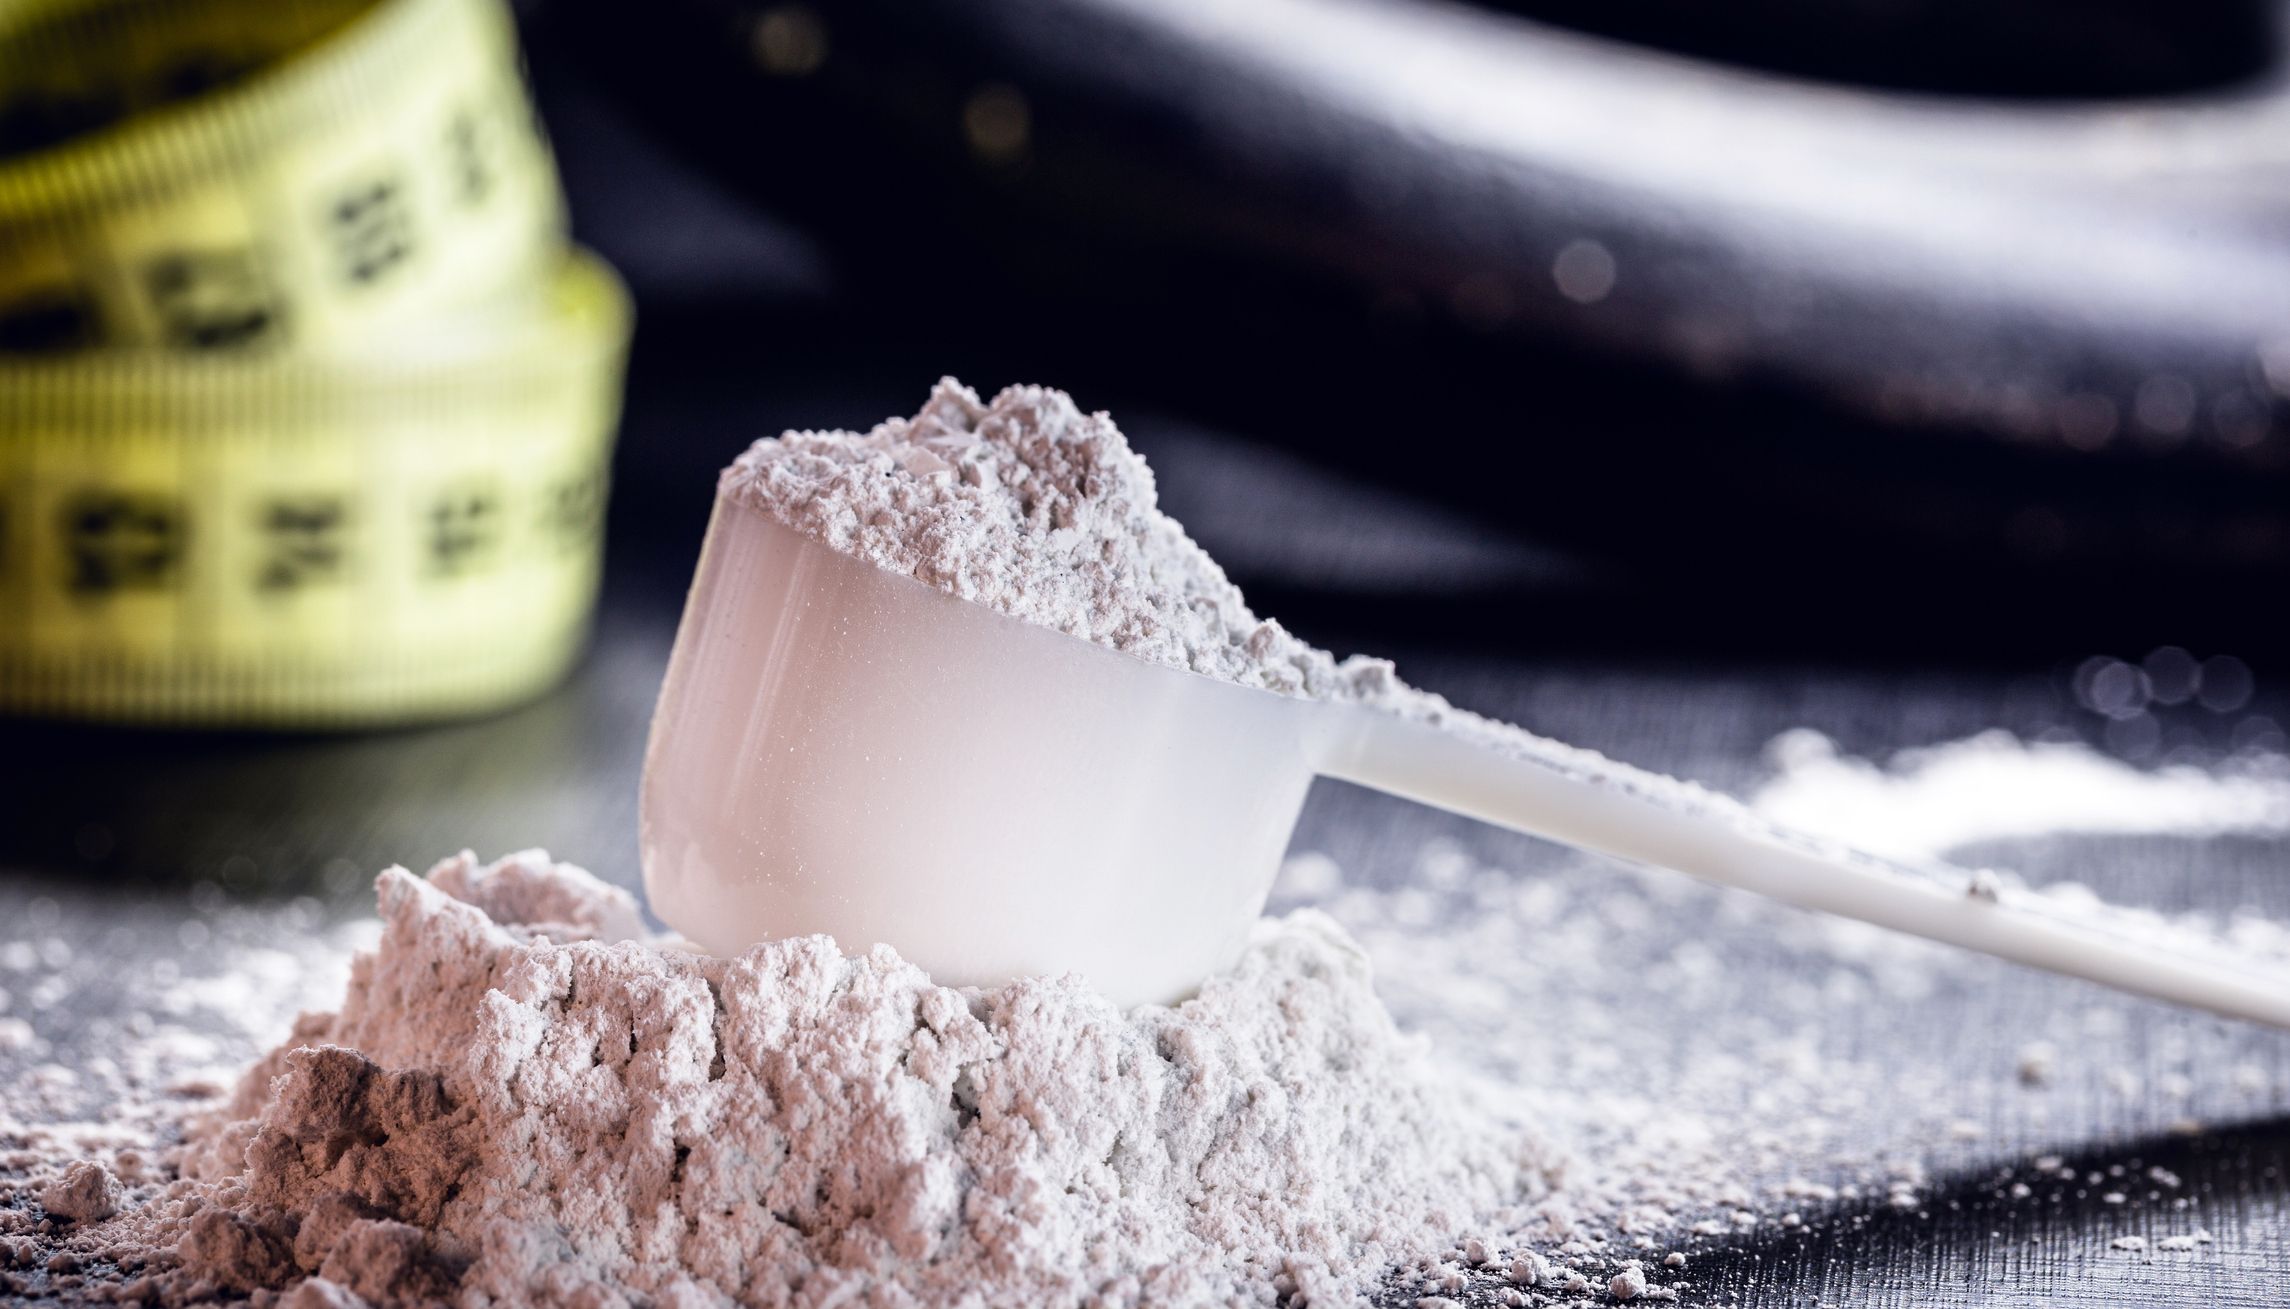 Does creatine make you hungrier? - Uncover the truth